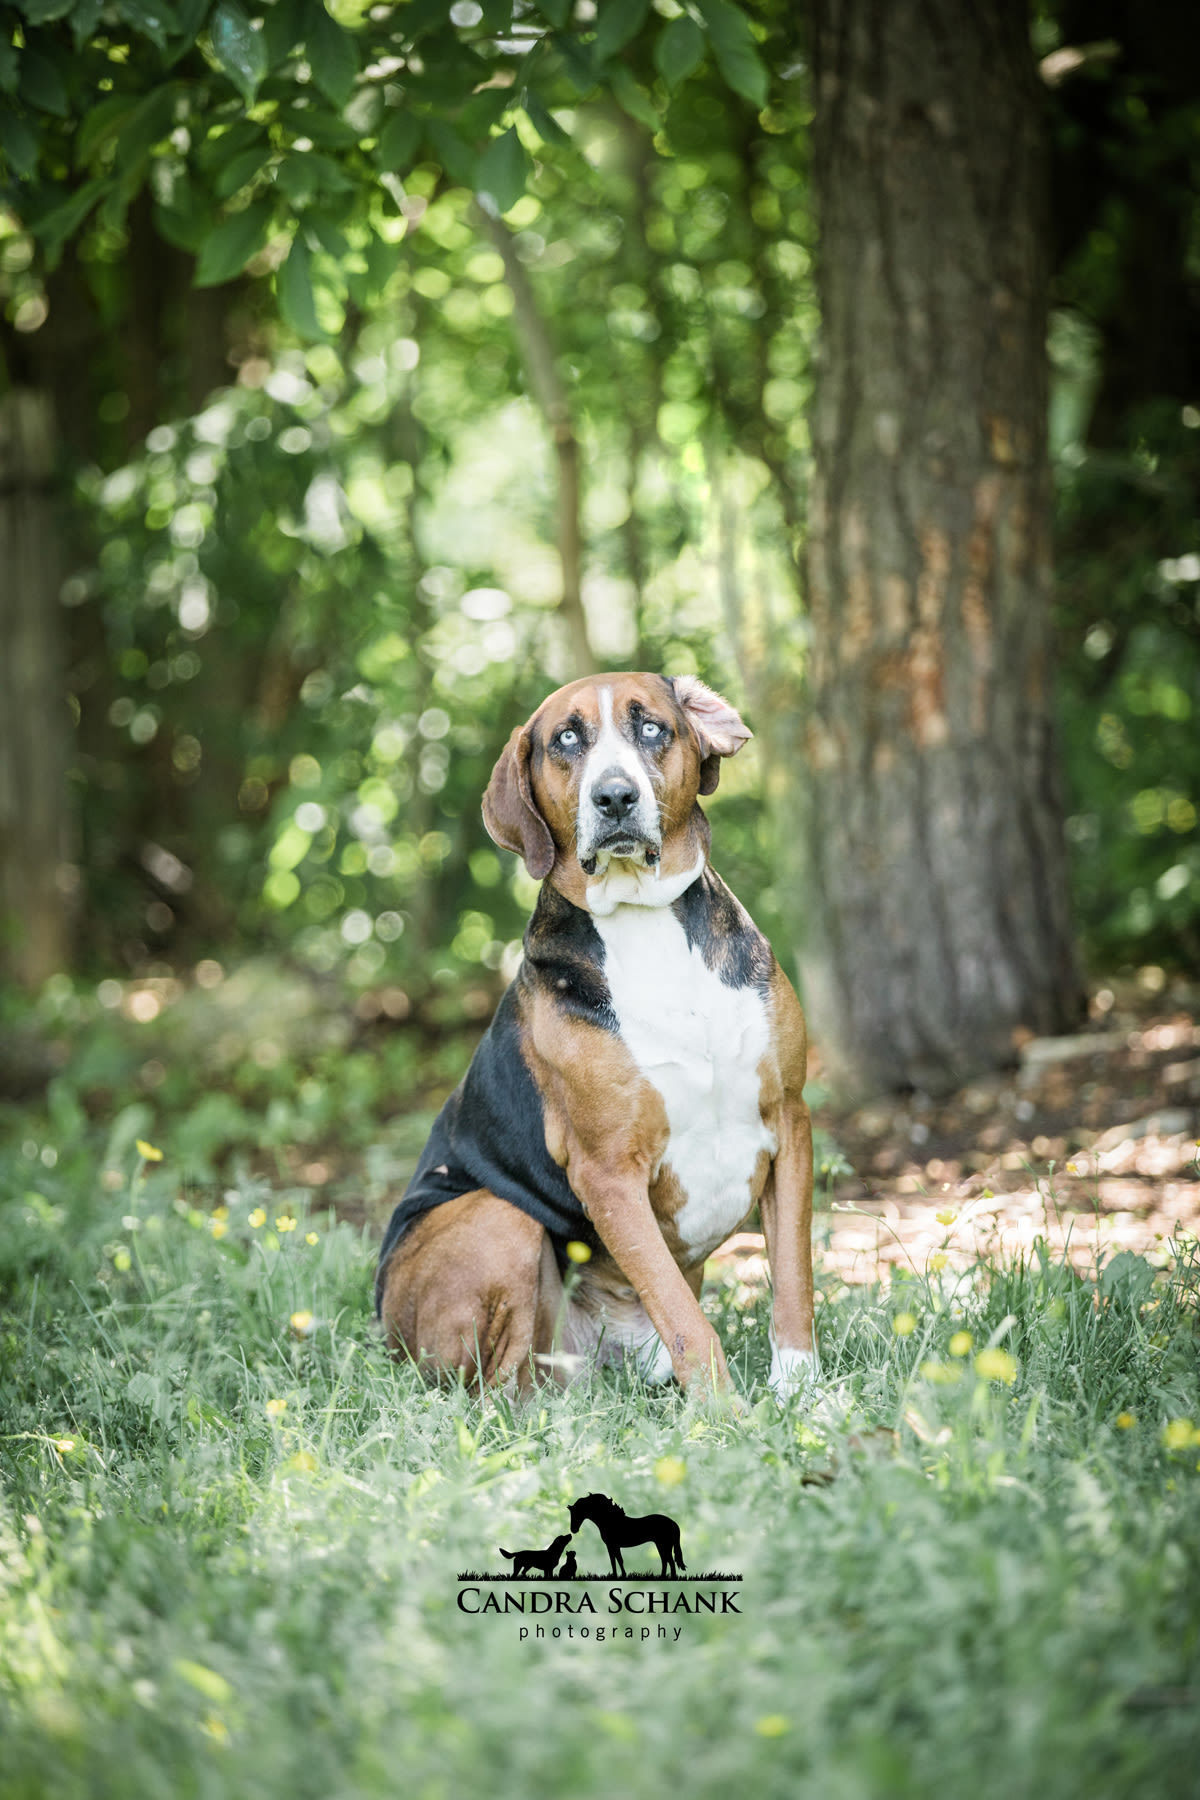 Rex, an adoptable Hound in Wiarton, ON, N0H 2T0 | Photo Image 6